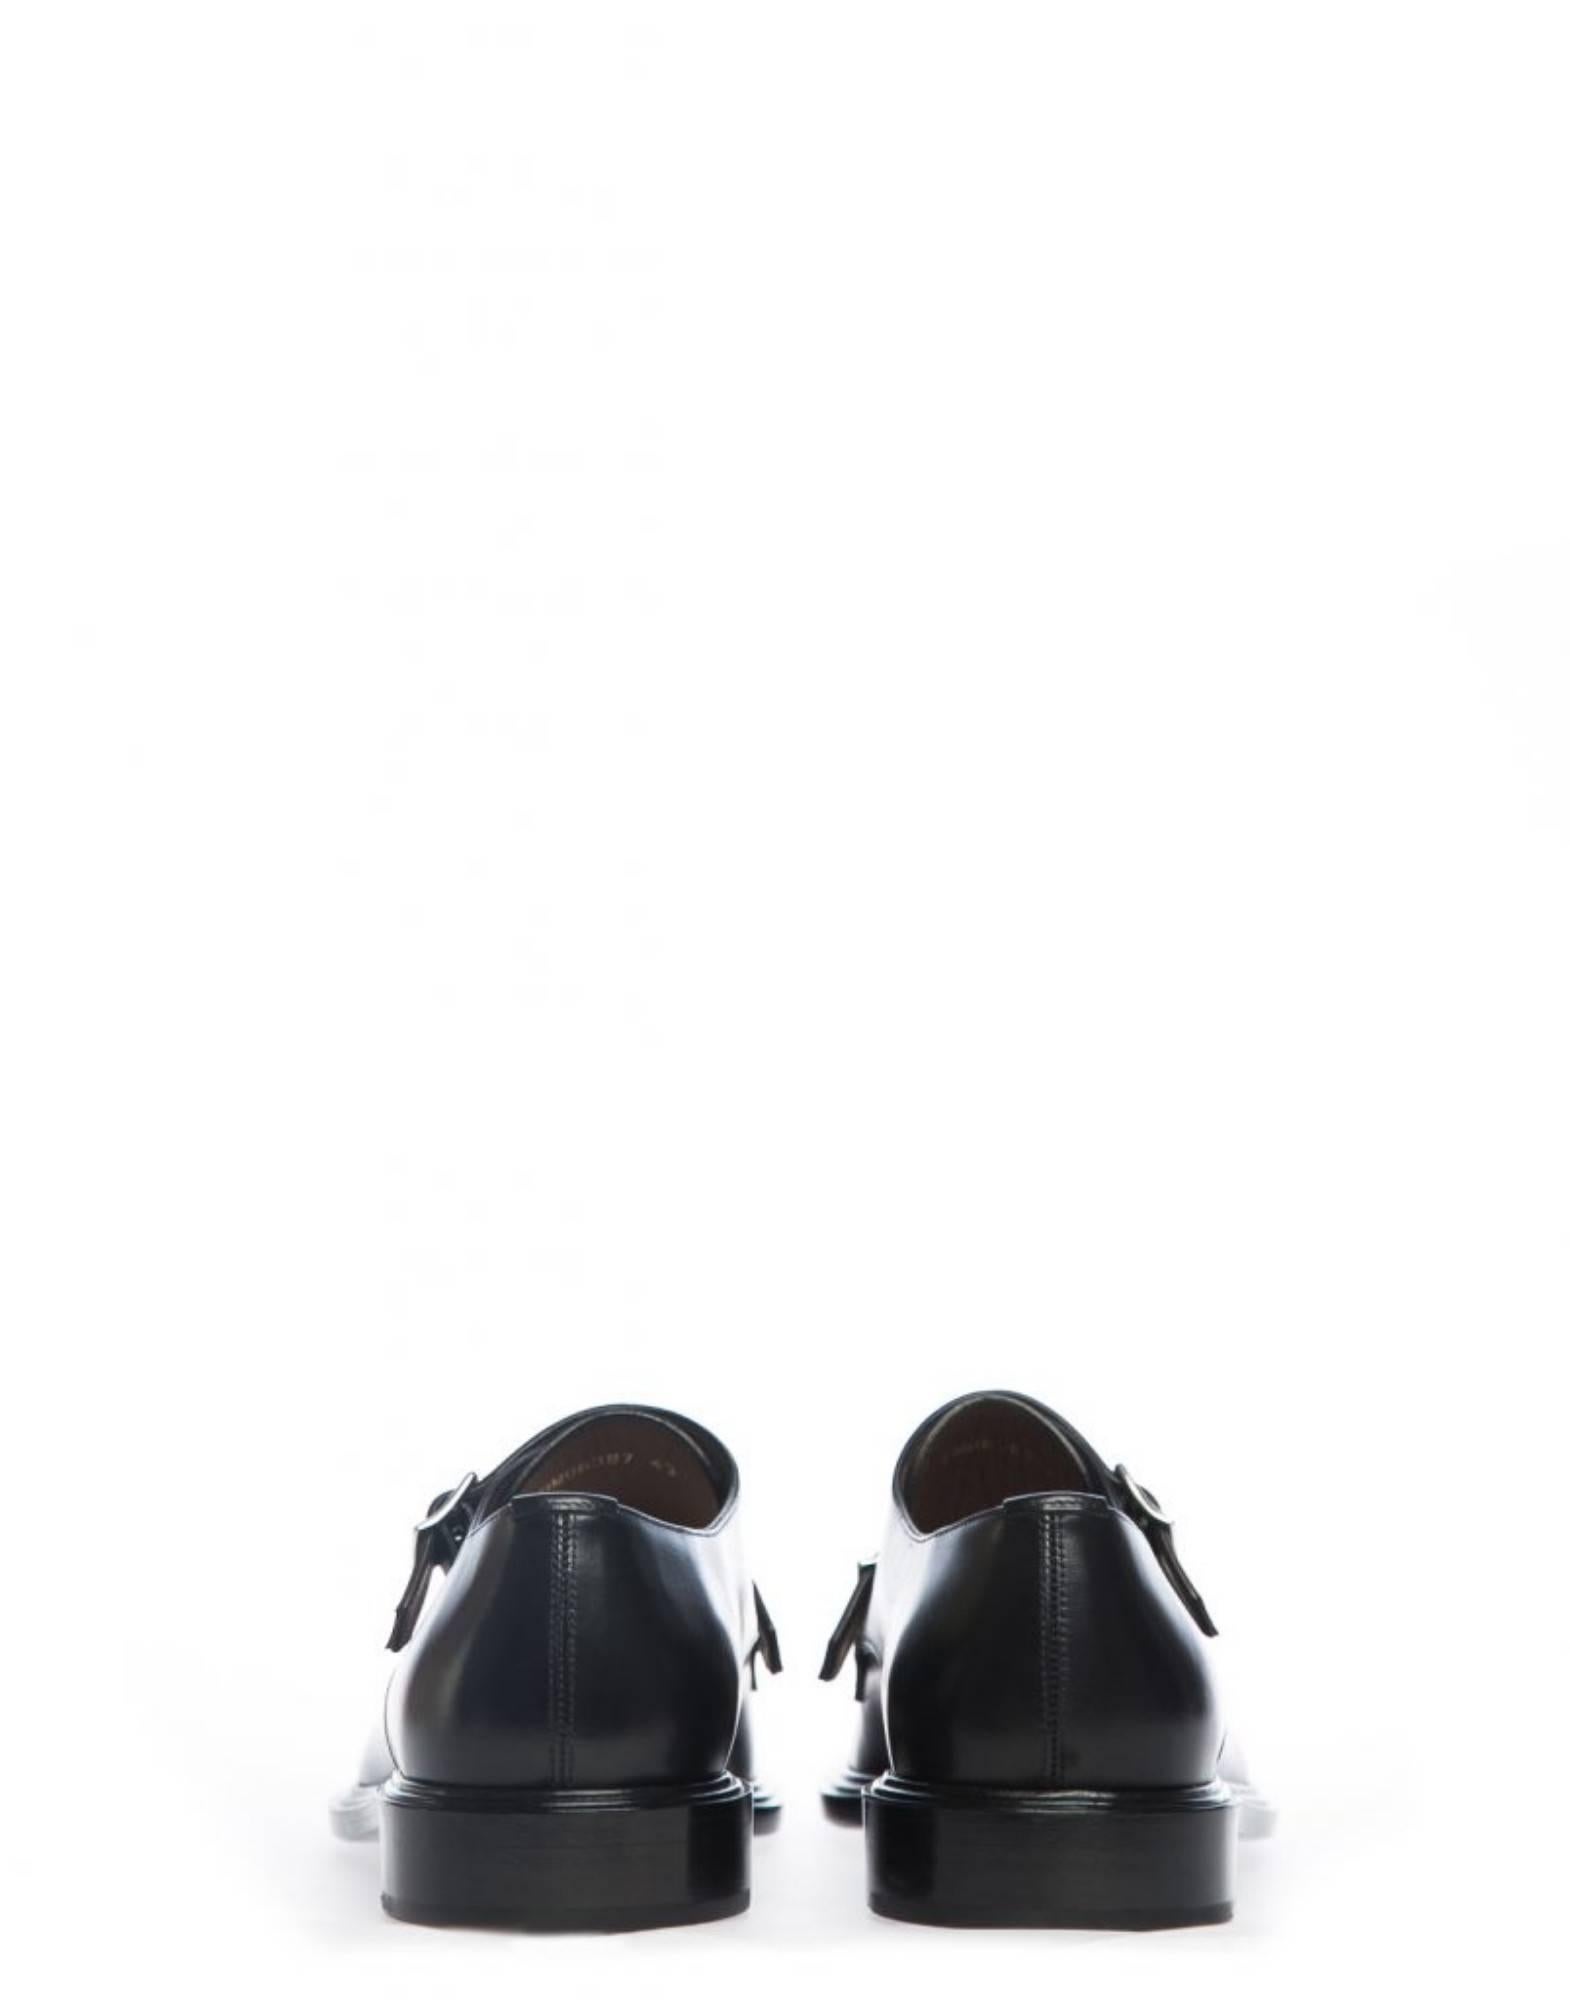 Black Givenchy Double Buckle Monk Strap Shoes (Size - 43) For Sale